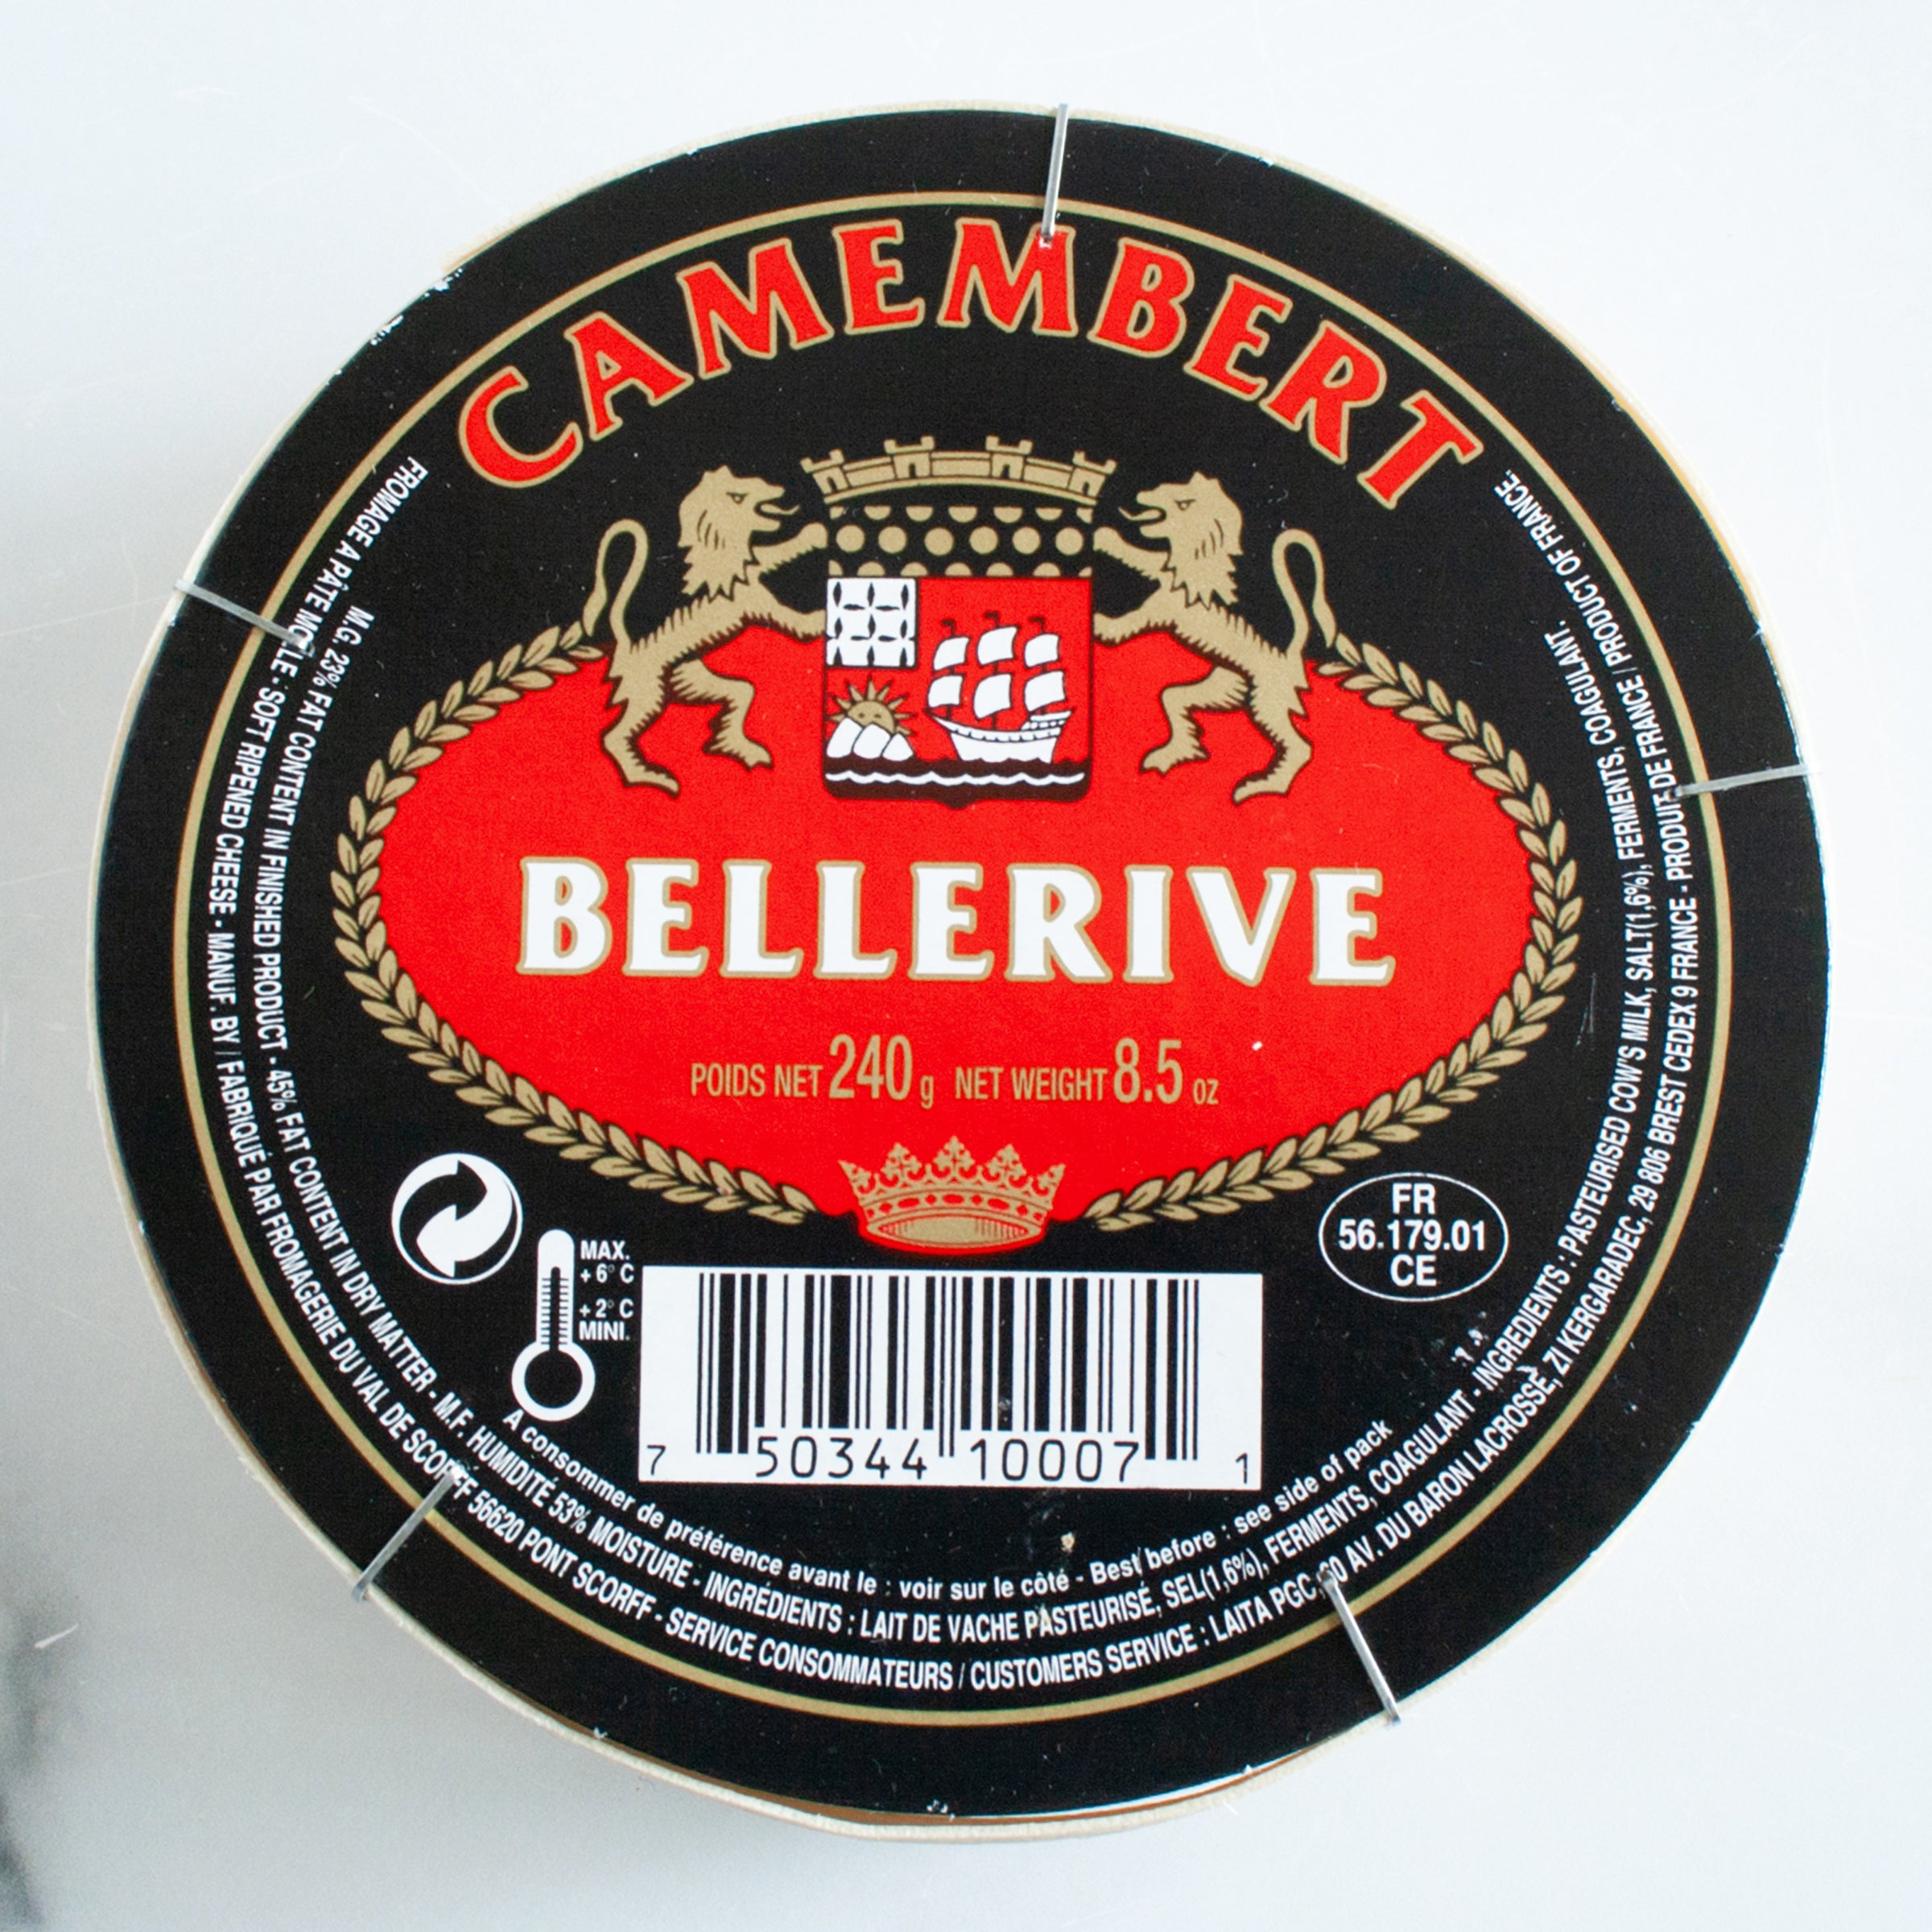 French Camembert Cheese